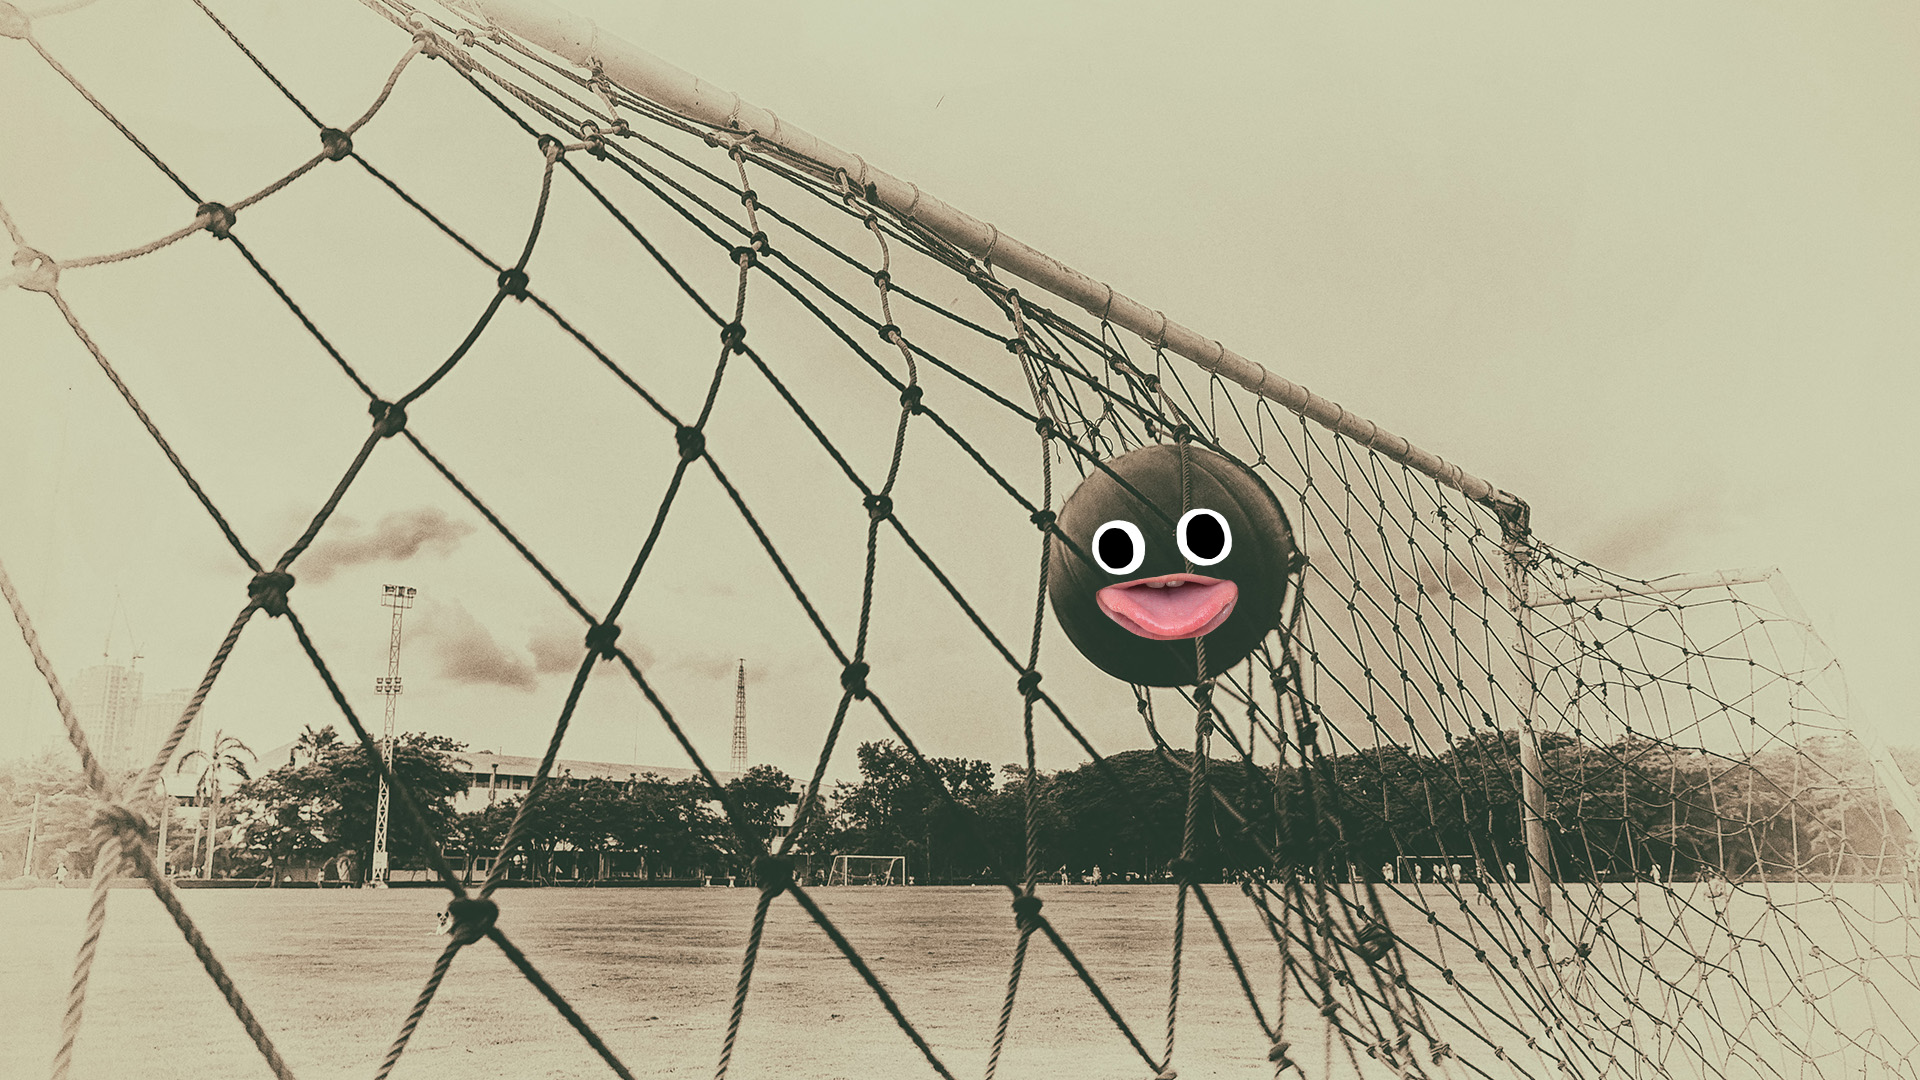 An old photograph of a goal and football